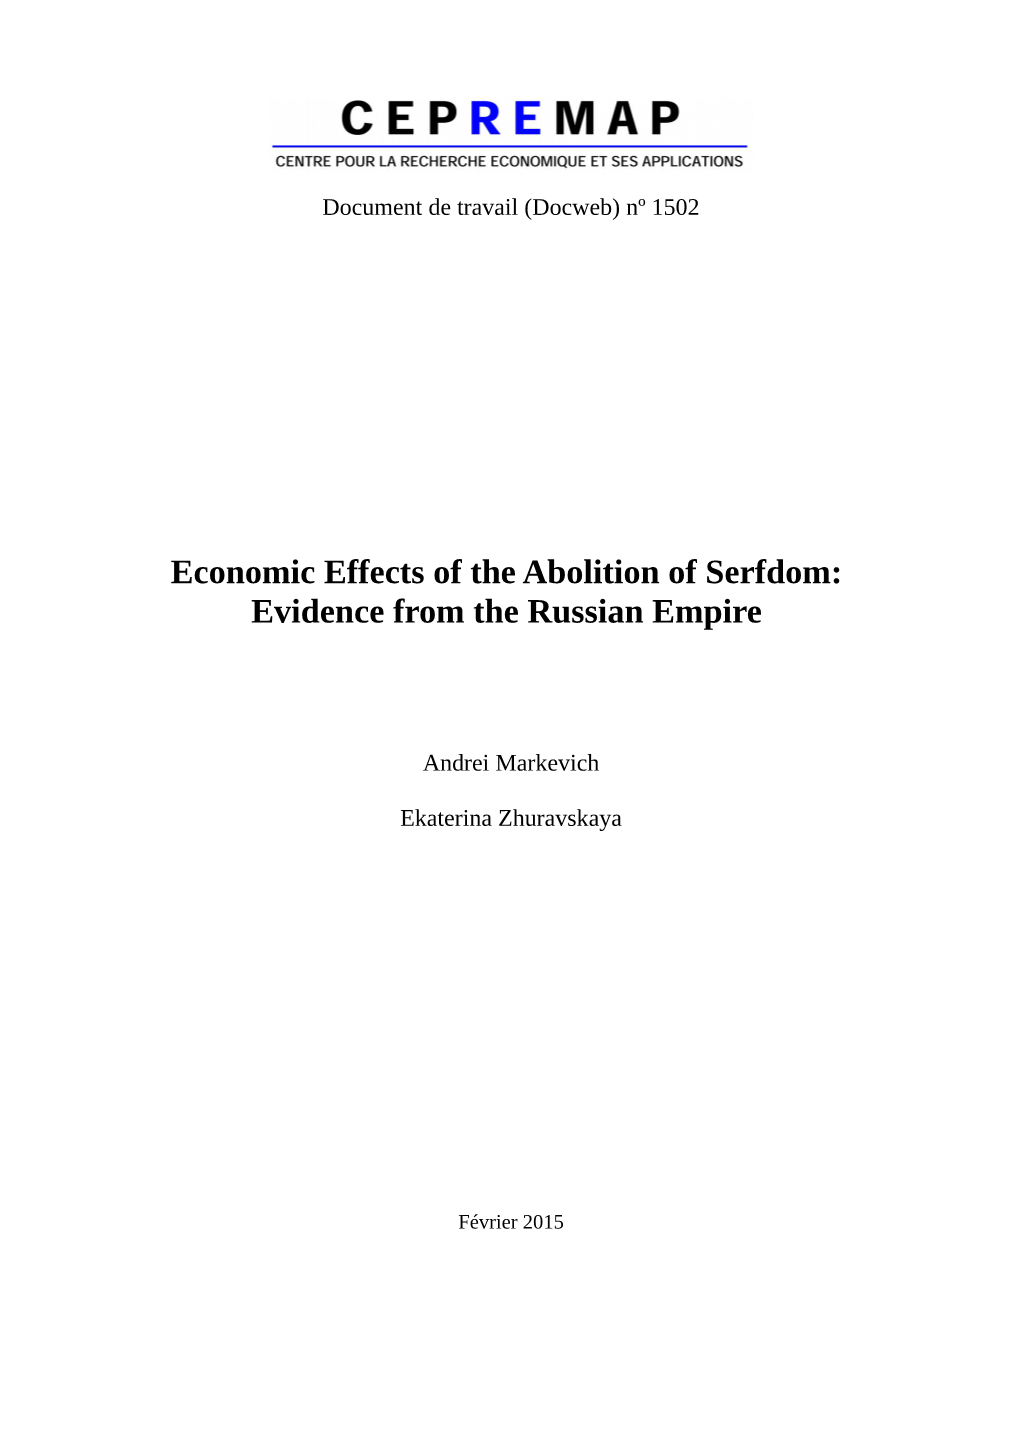 Economic Effects of the Abolition of Serfdom: Evidence from the Russian Empire